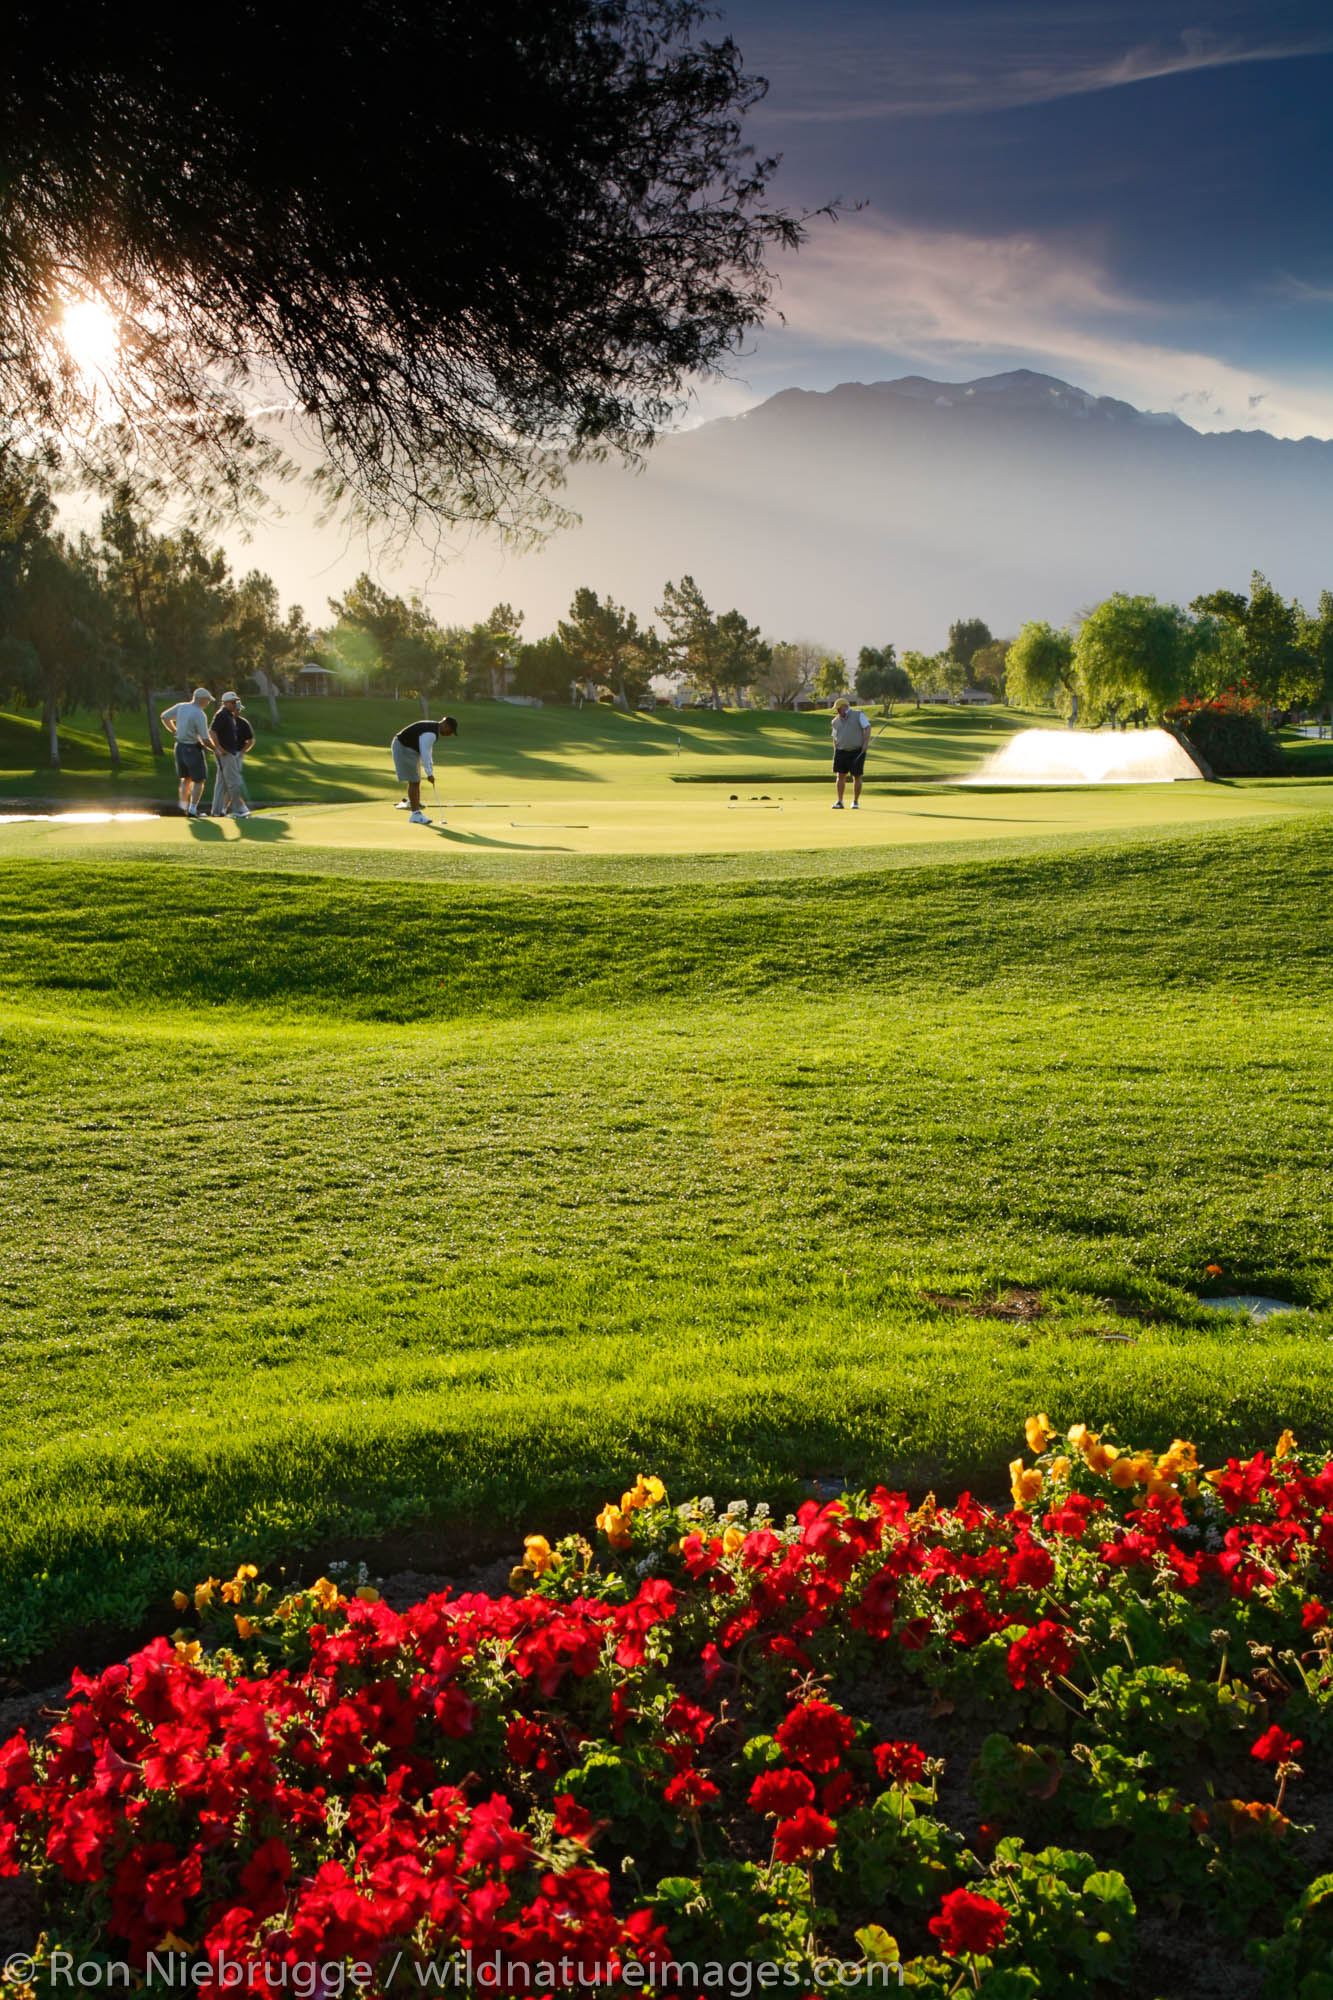 The 14th hole at the golf course at the Westin Mission Hills Resort and Spa in Rancho Mirage near Palm Springs, California.